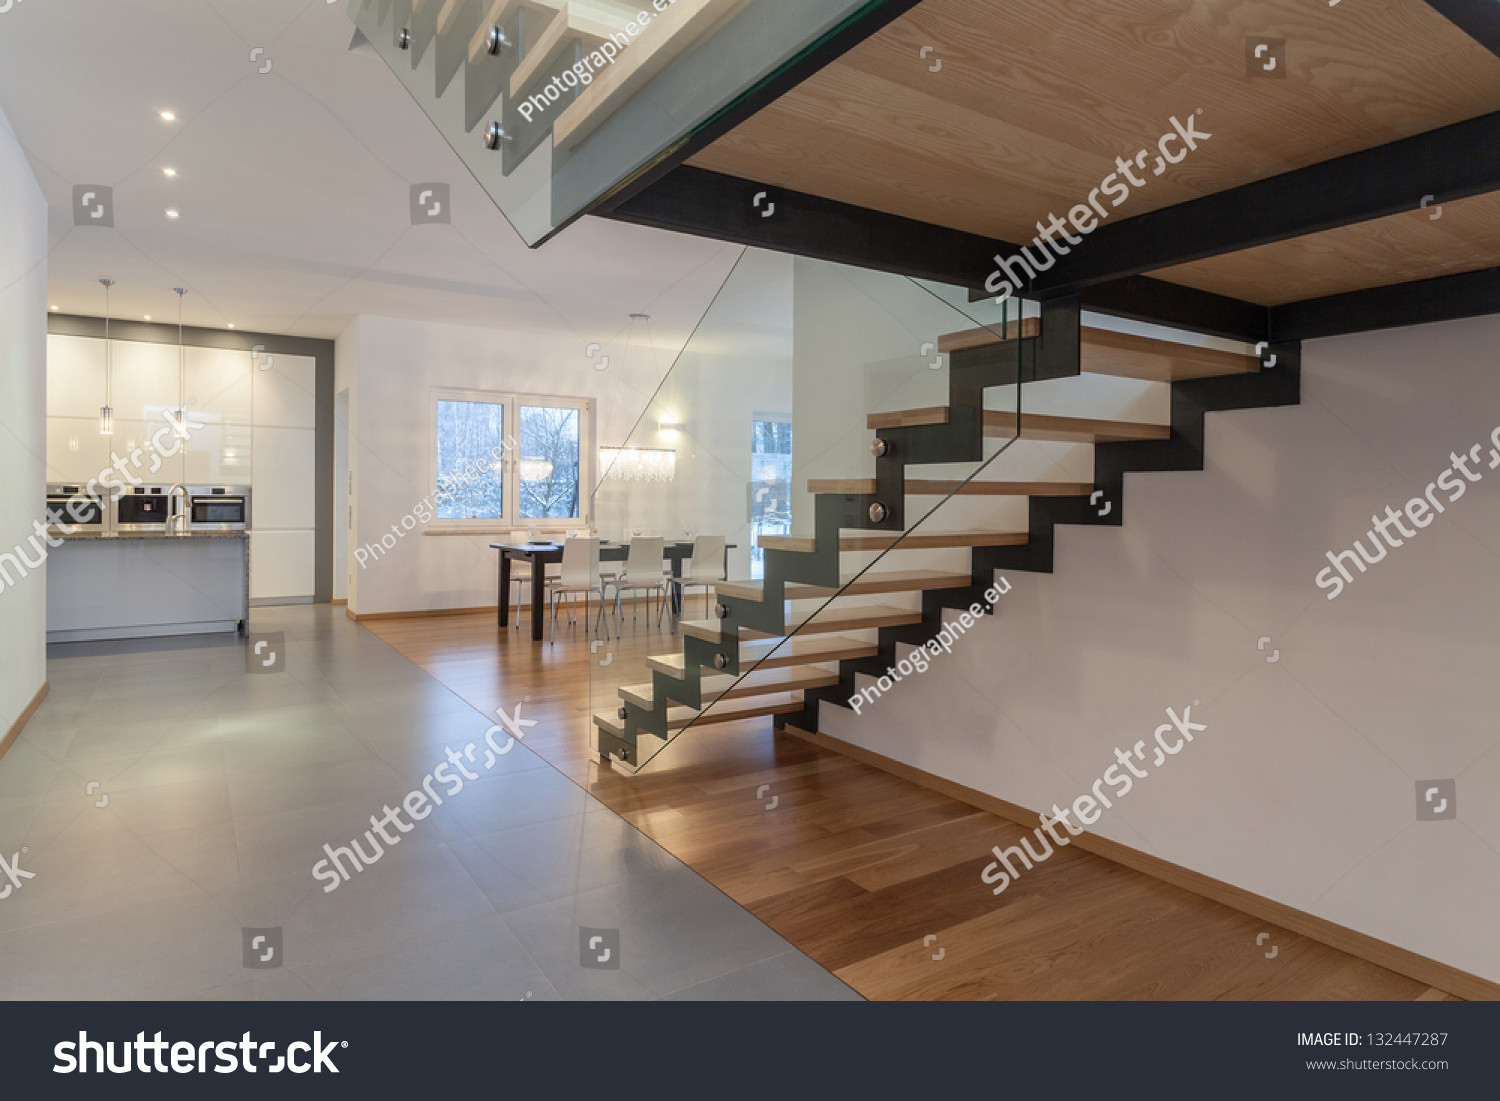 15 Popular How to Hardwood Floor Stairs 2024 free download how to hardwood floor stairs of designers interior interior od modern house and staircase ez canvas throughout id 132447287